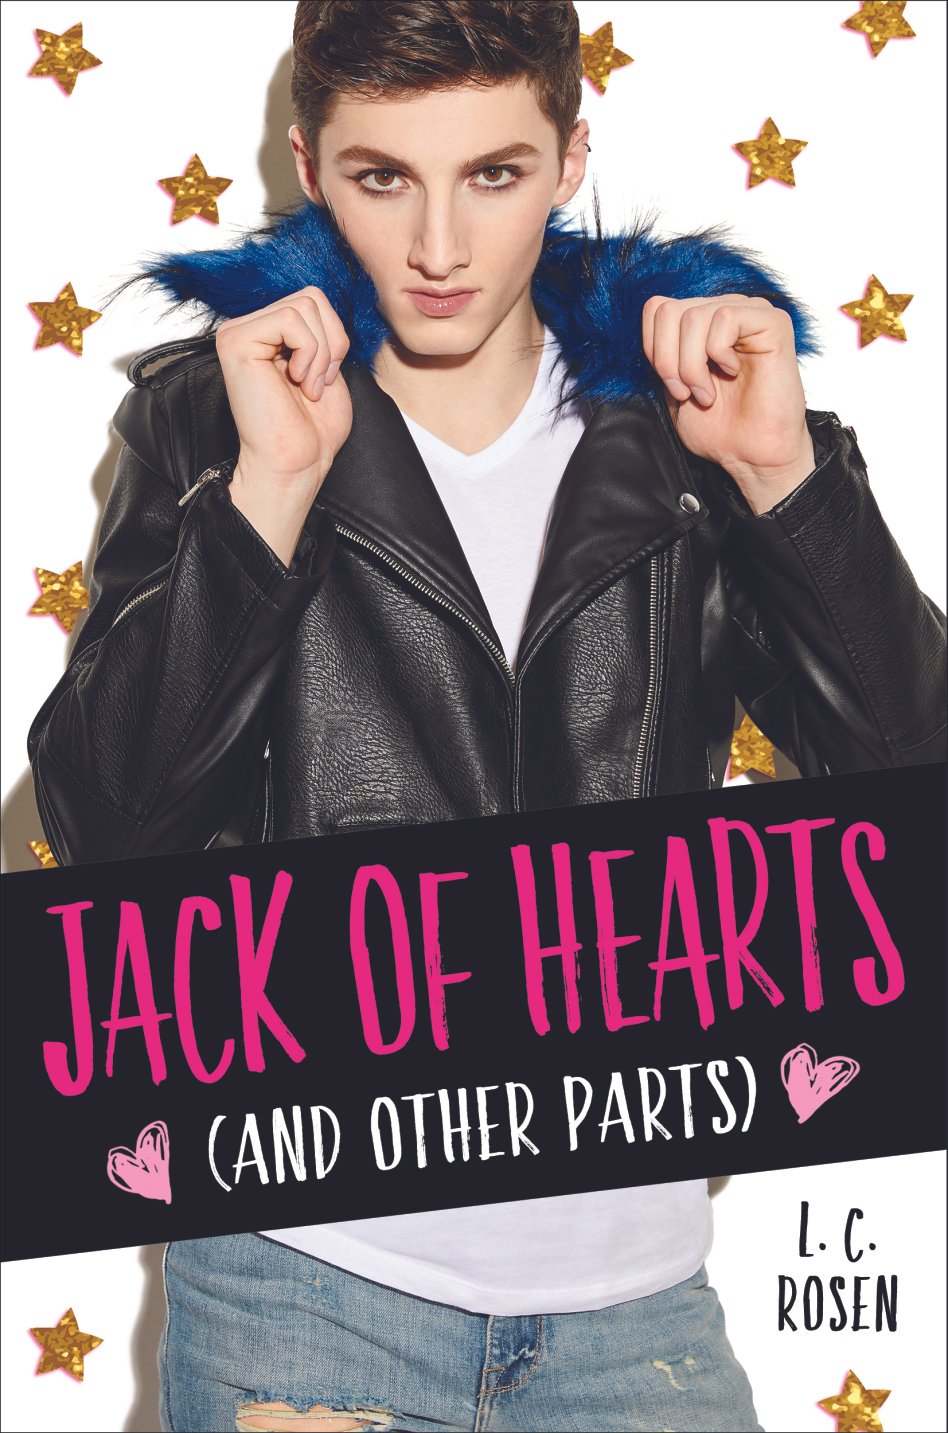 Jack of Hearts - Book Cover.jpg